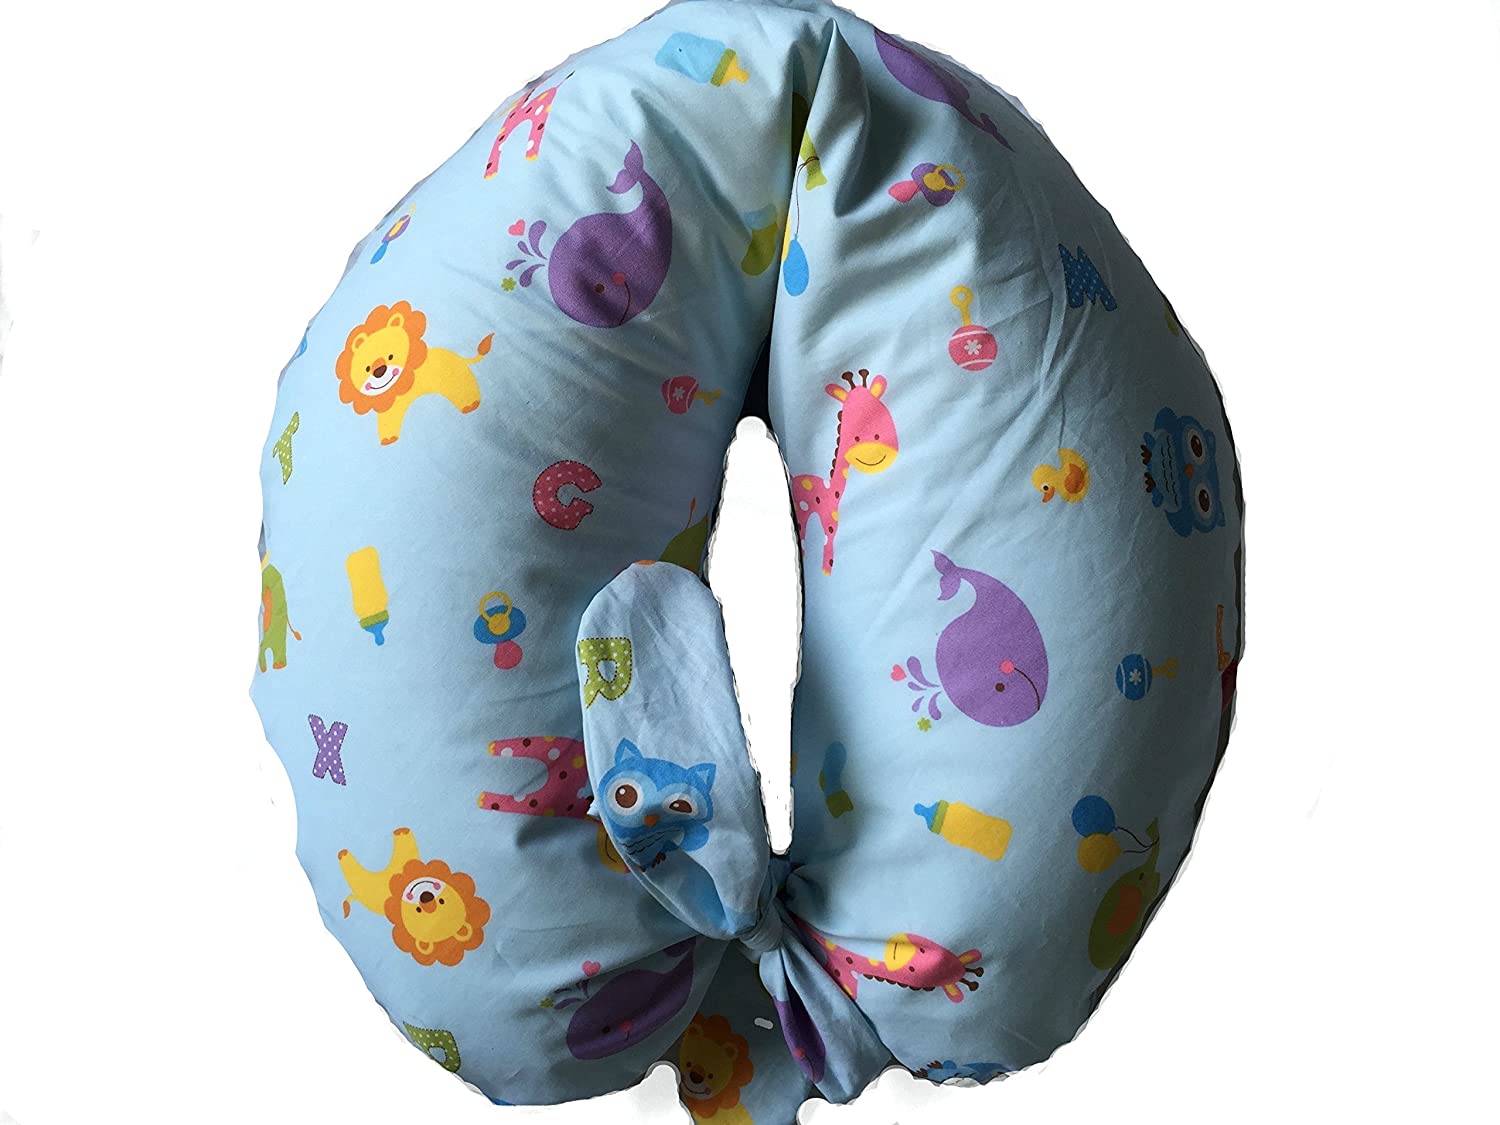 merrymama - Nursing pillow + lining with lacing/cm 130 (filled with polystyrene balls), zoo background blue